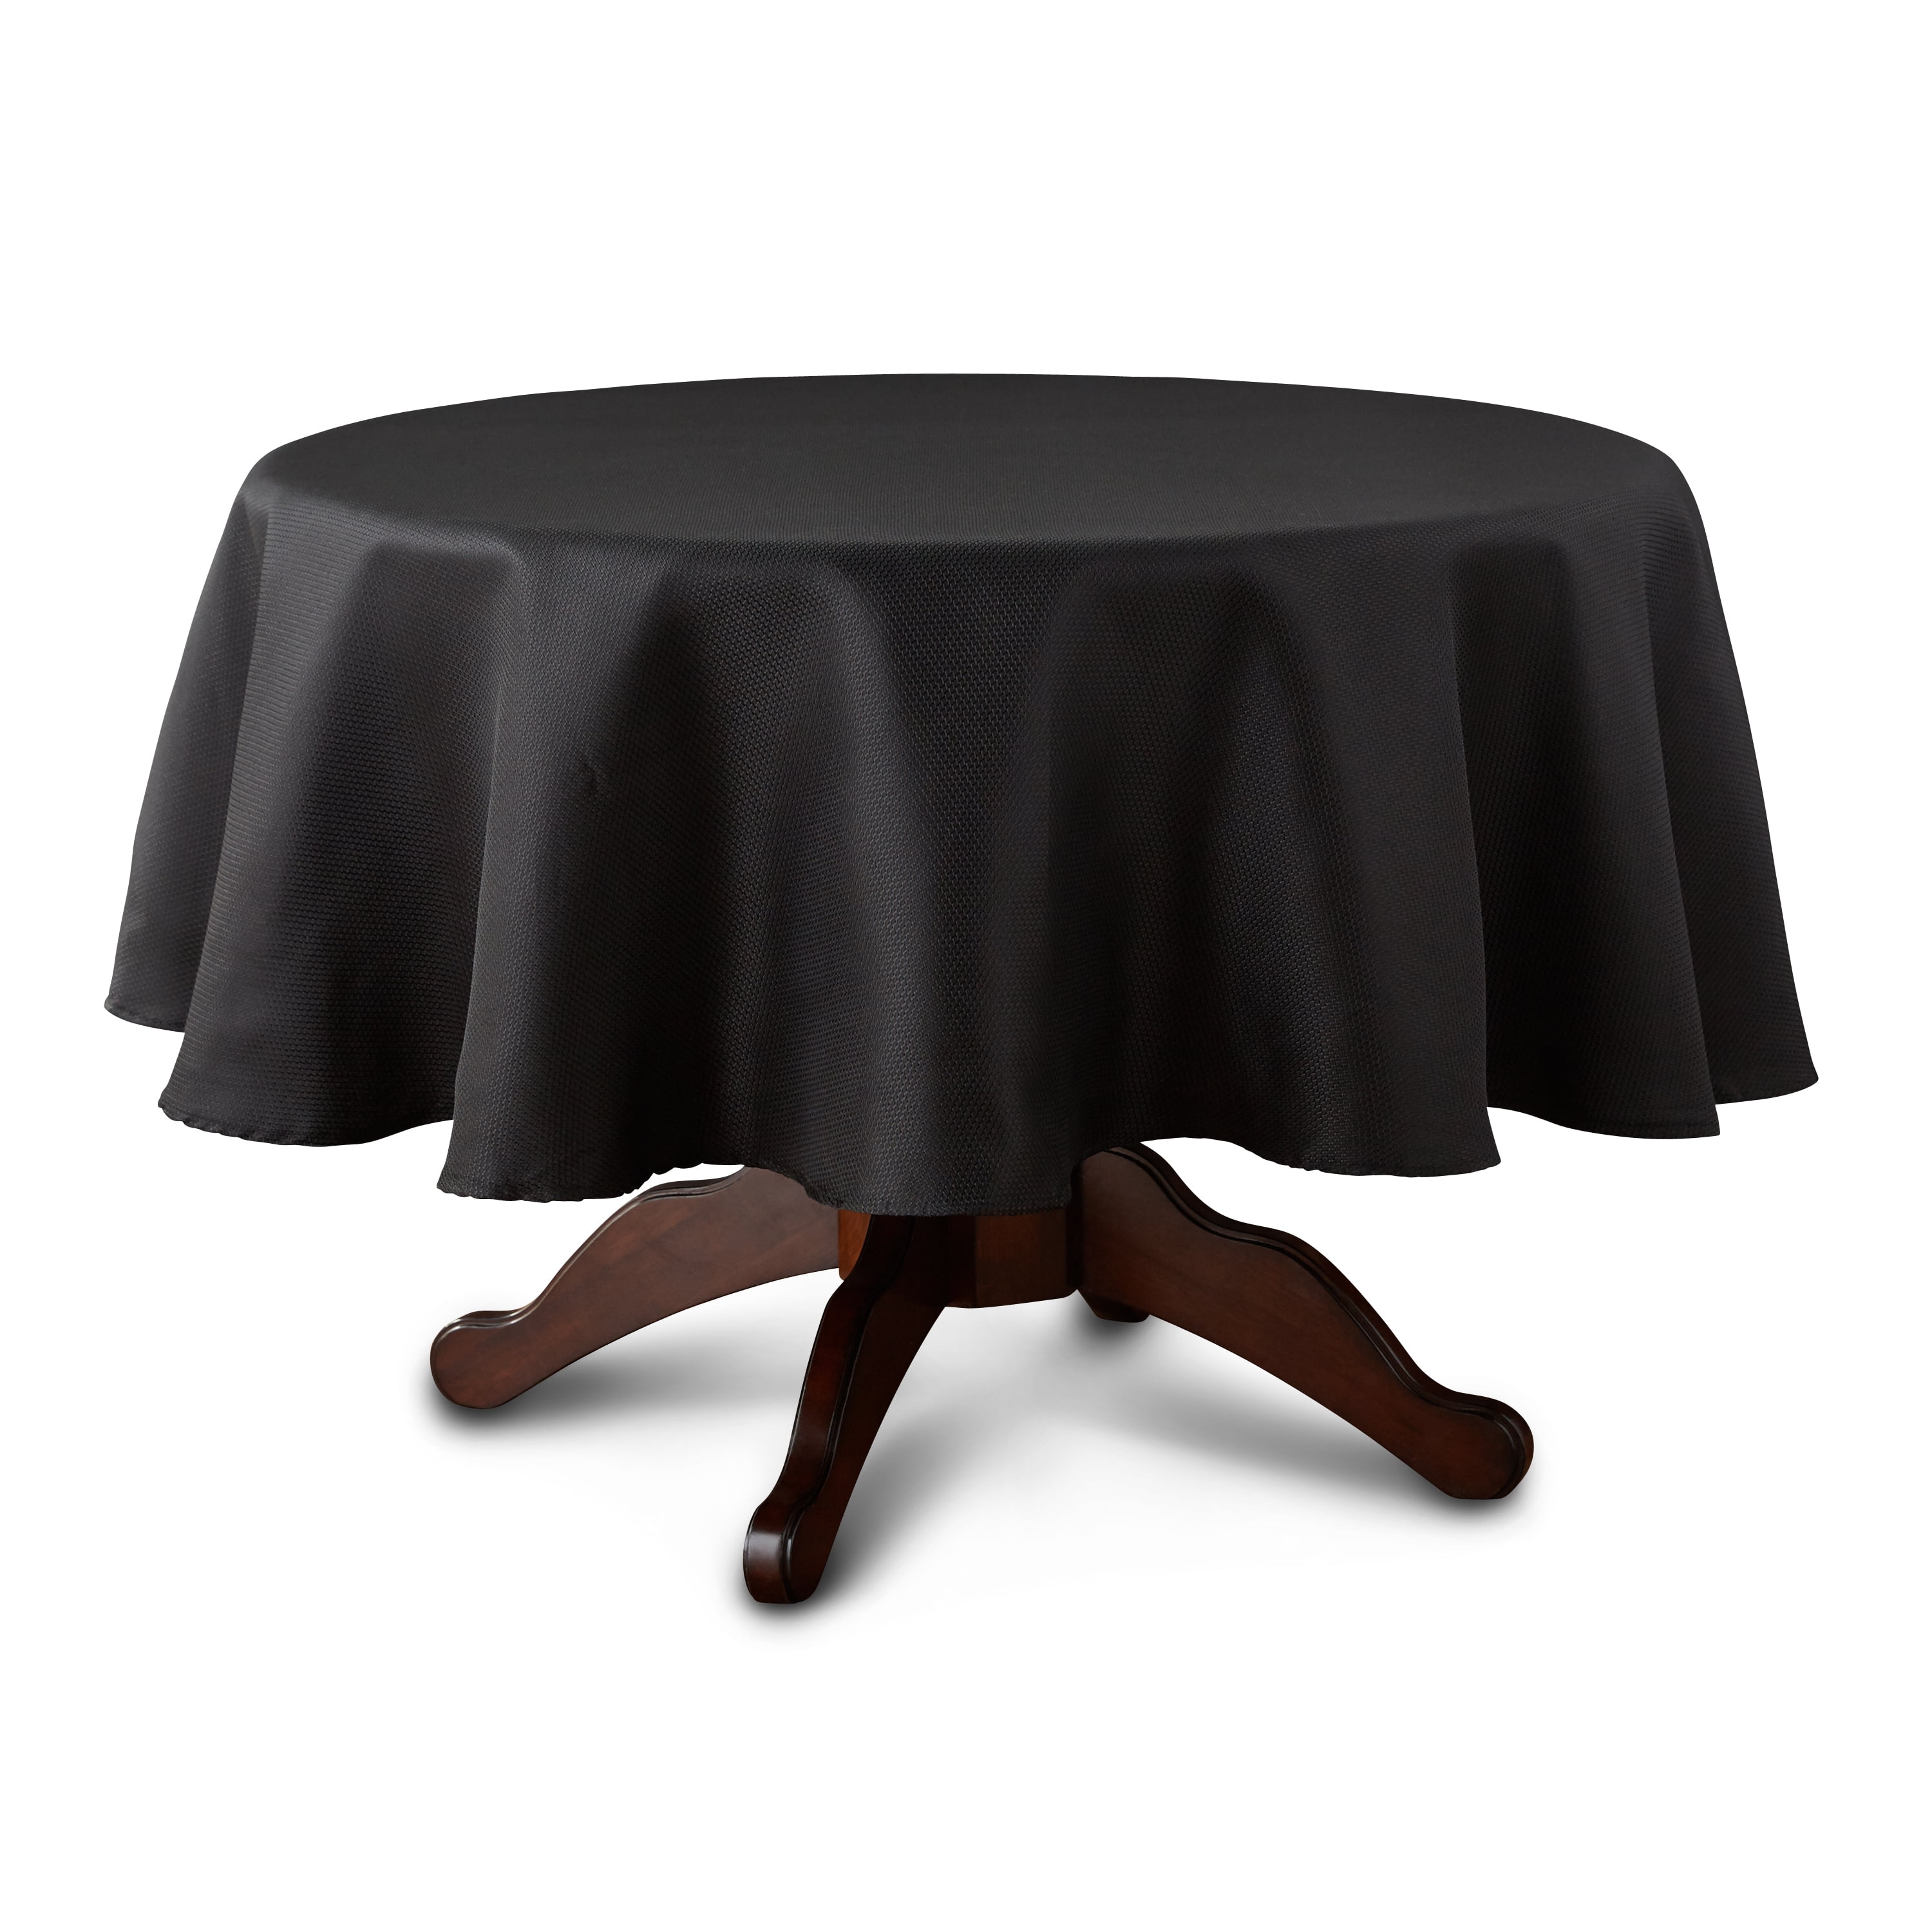 LinenTablecloth 6 ft Fitted Polyester Tablecloth Black 6FTTD-010111